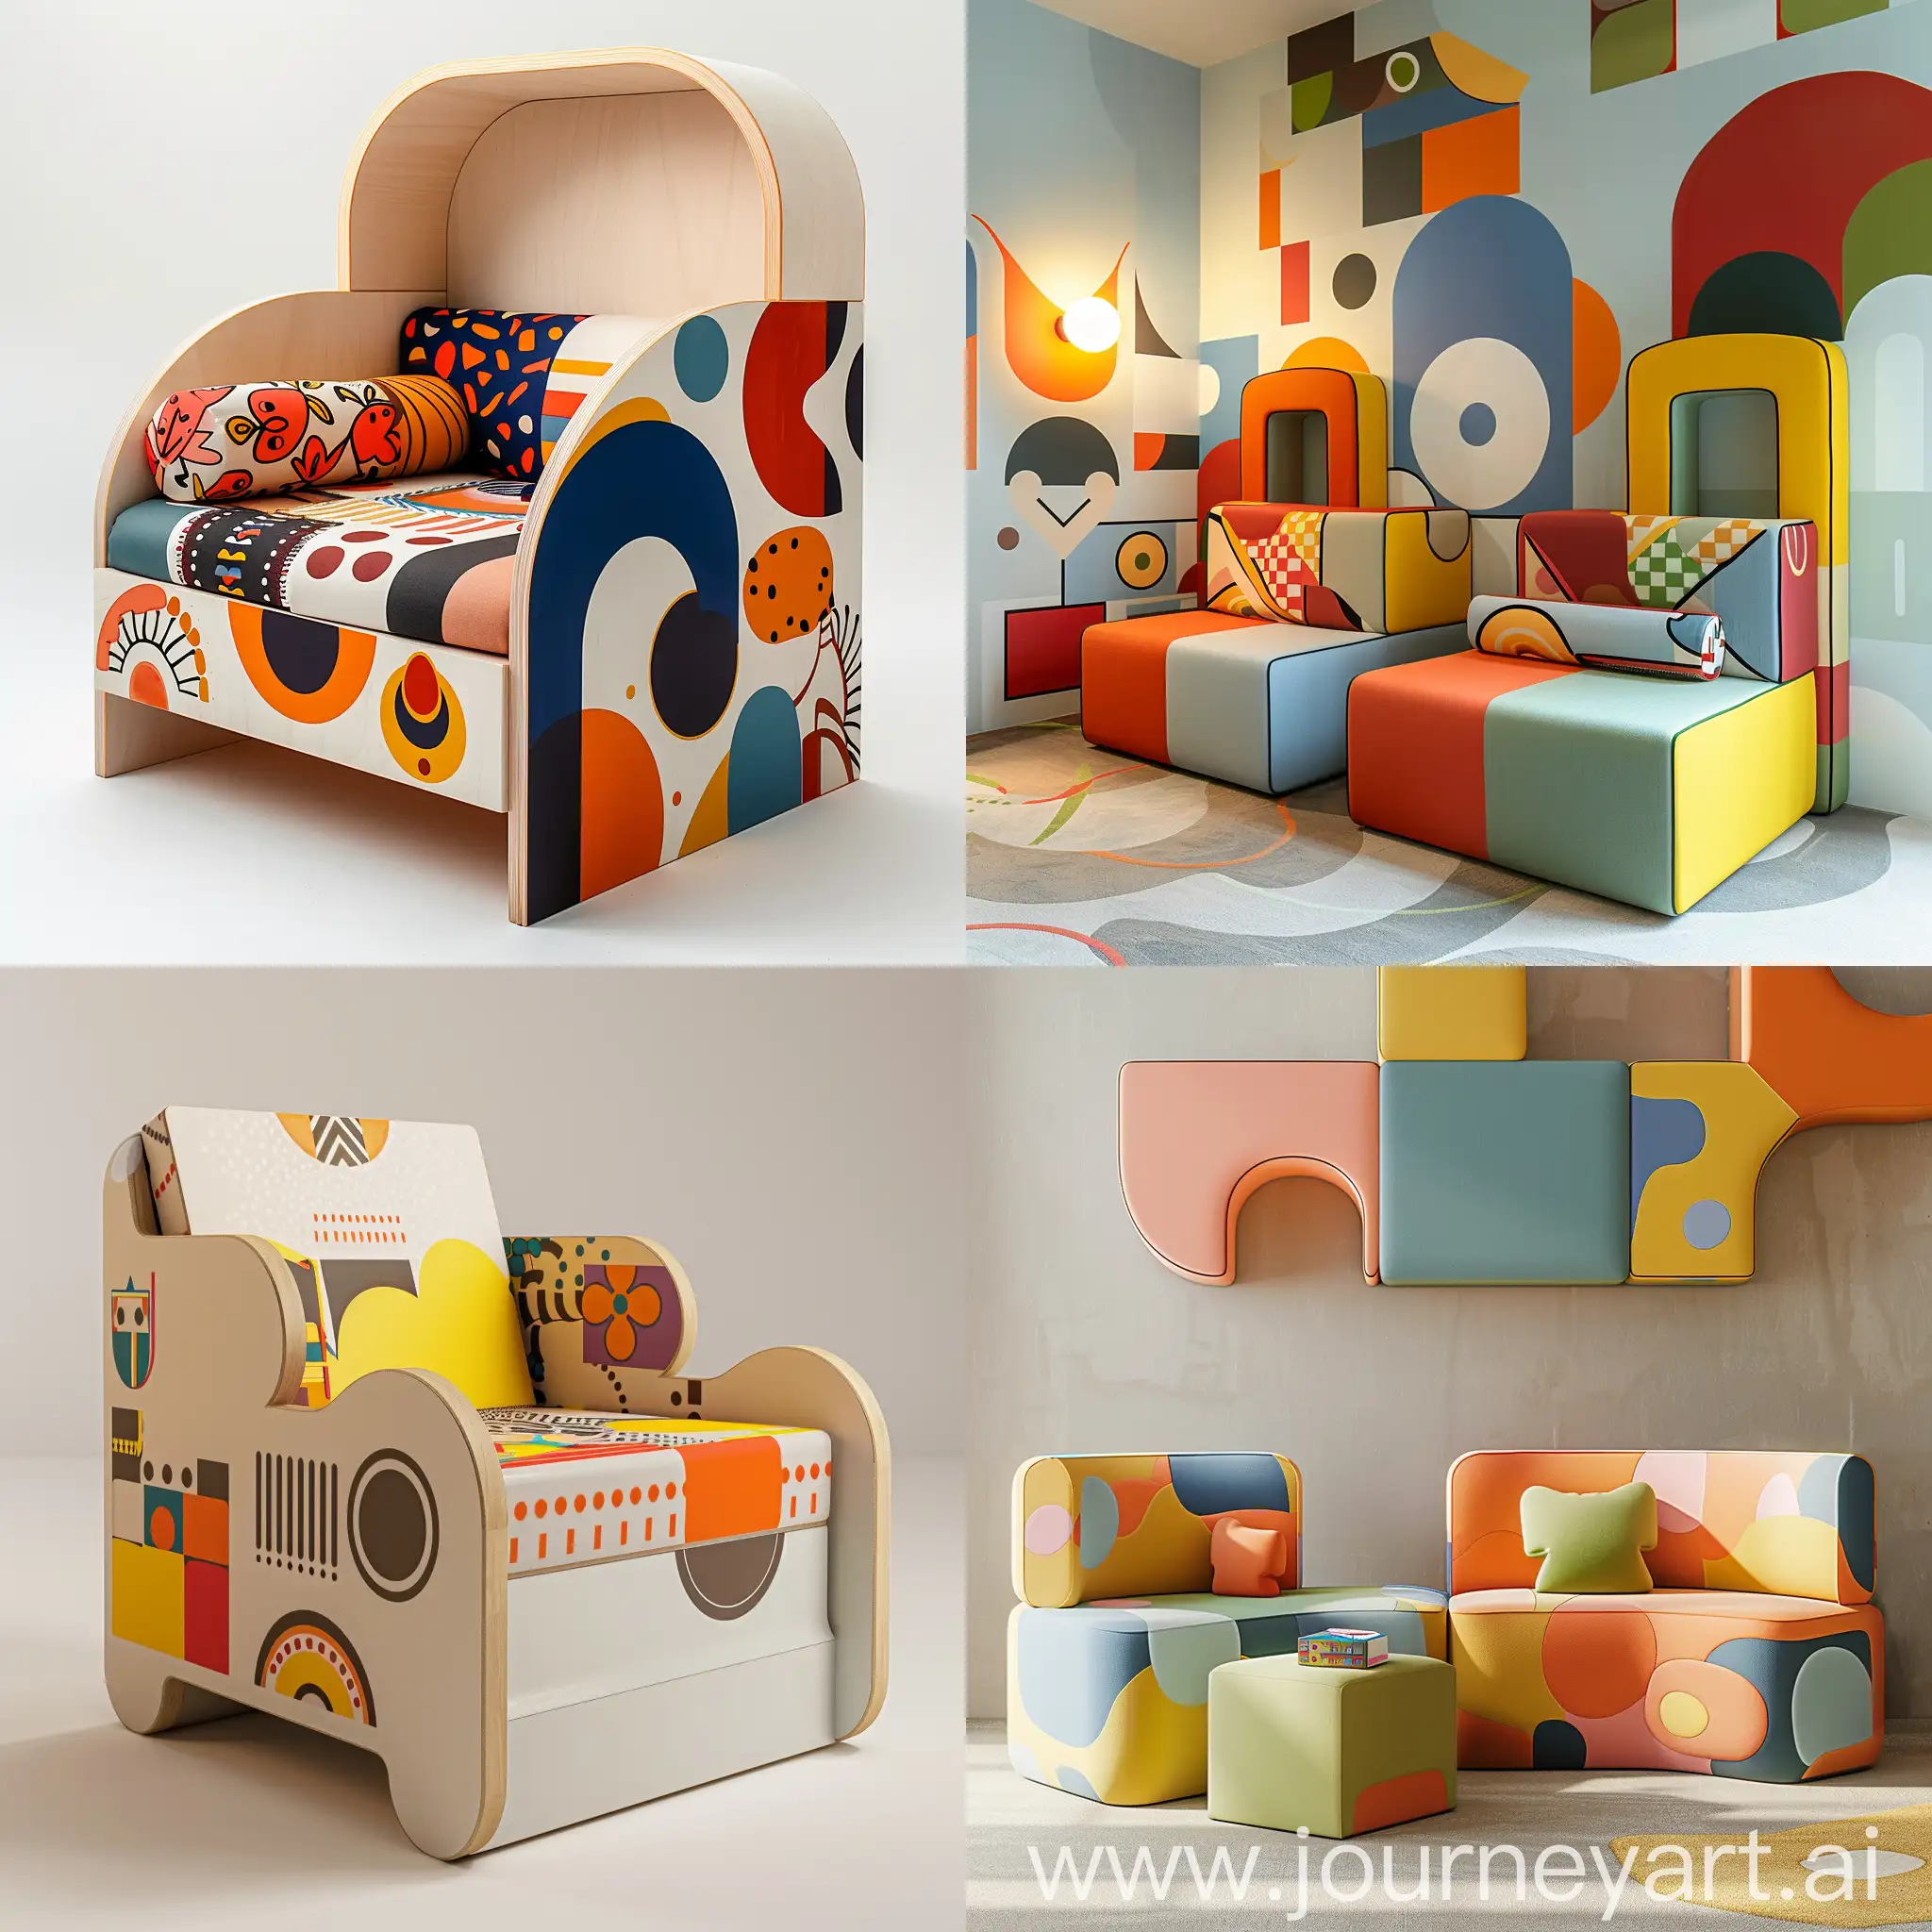 Multi-age sharing of children's furniture to create a parent-child interactive experience,LOGO,patterning,abstract